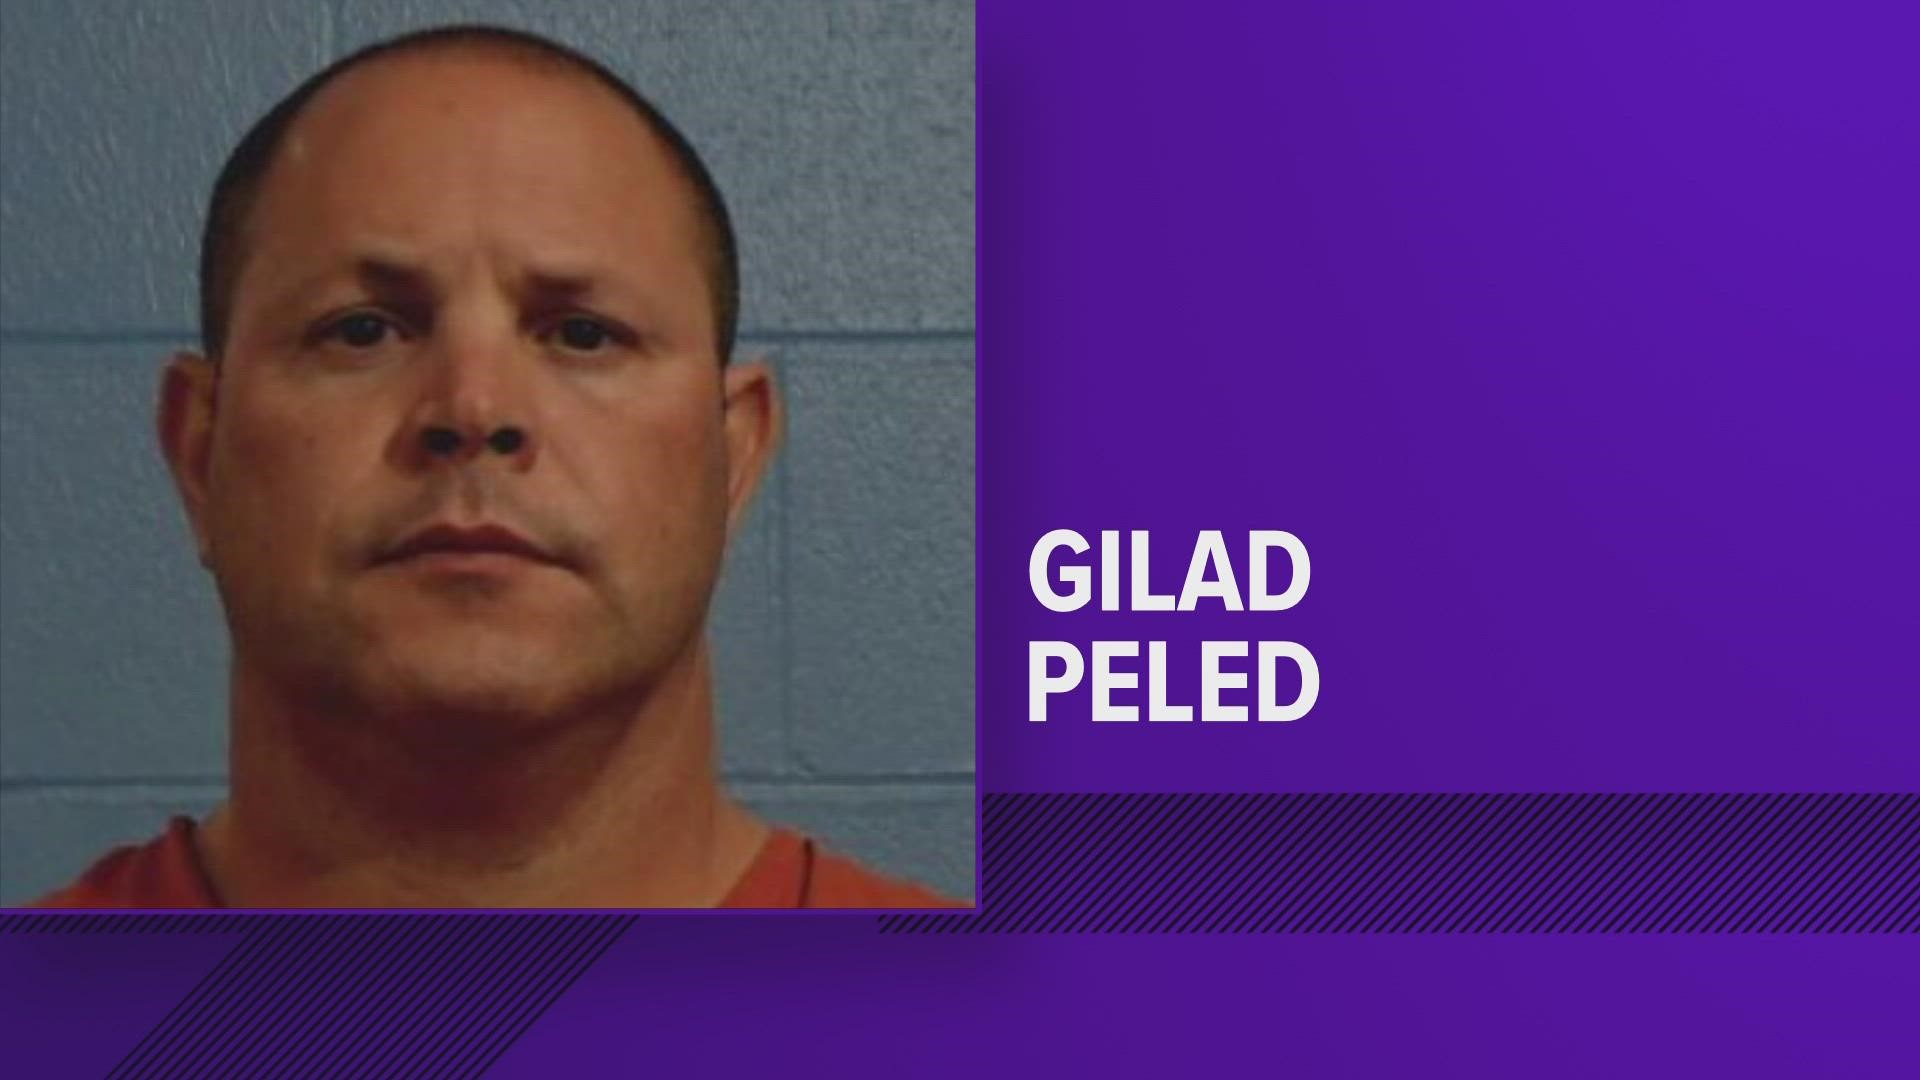 Gilad Peled, along with Erik Charles Maund and two others, was indicted in connection with a plot to murder and kidnap a couple in Tennessee.